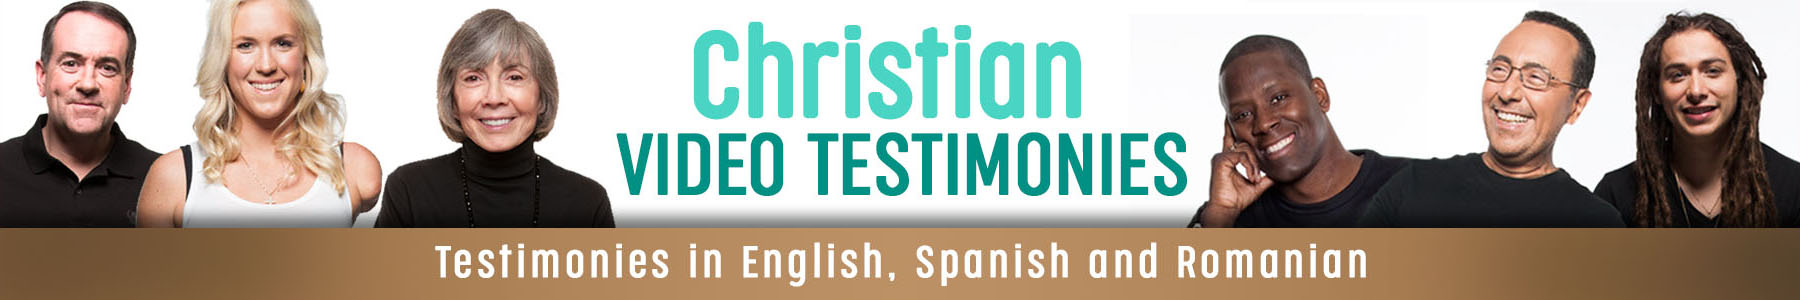 I am Second - Online Testimonies in English with Romanian Subtitles